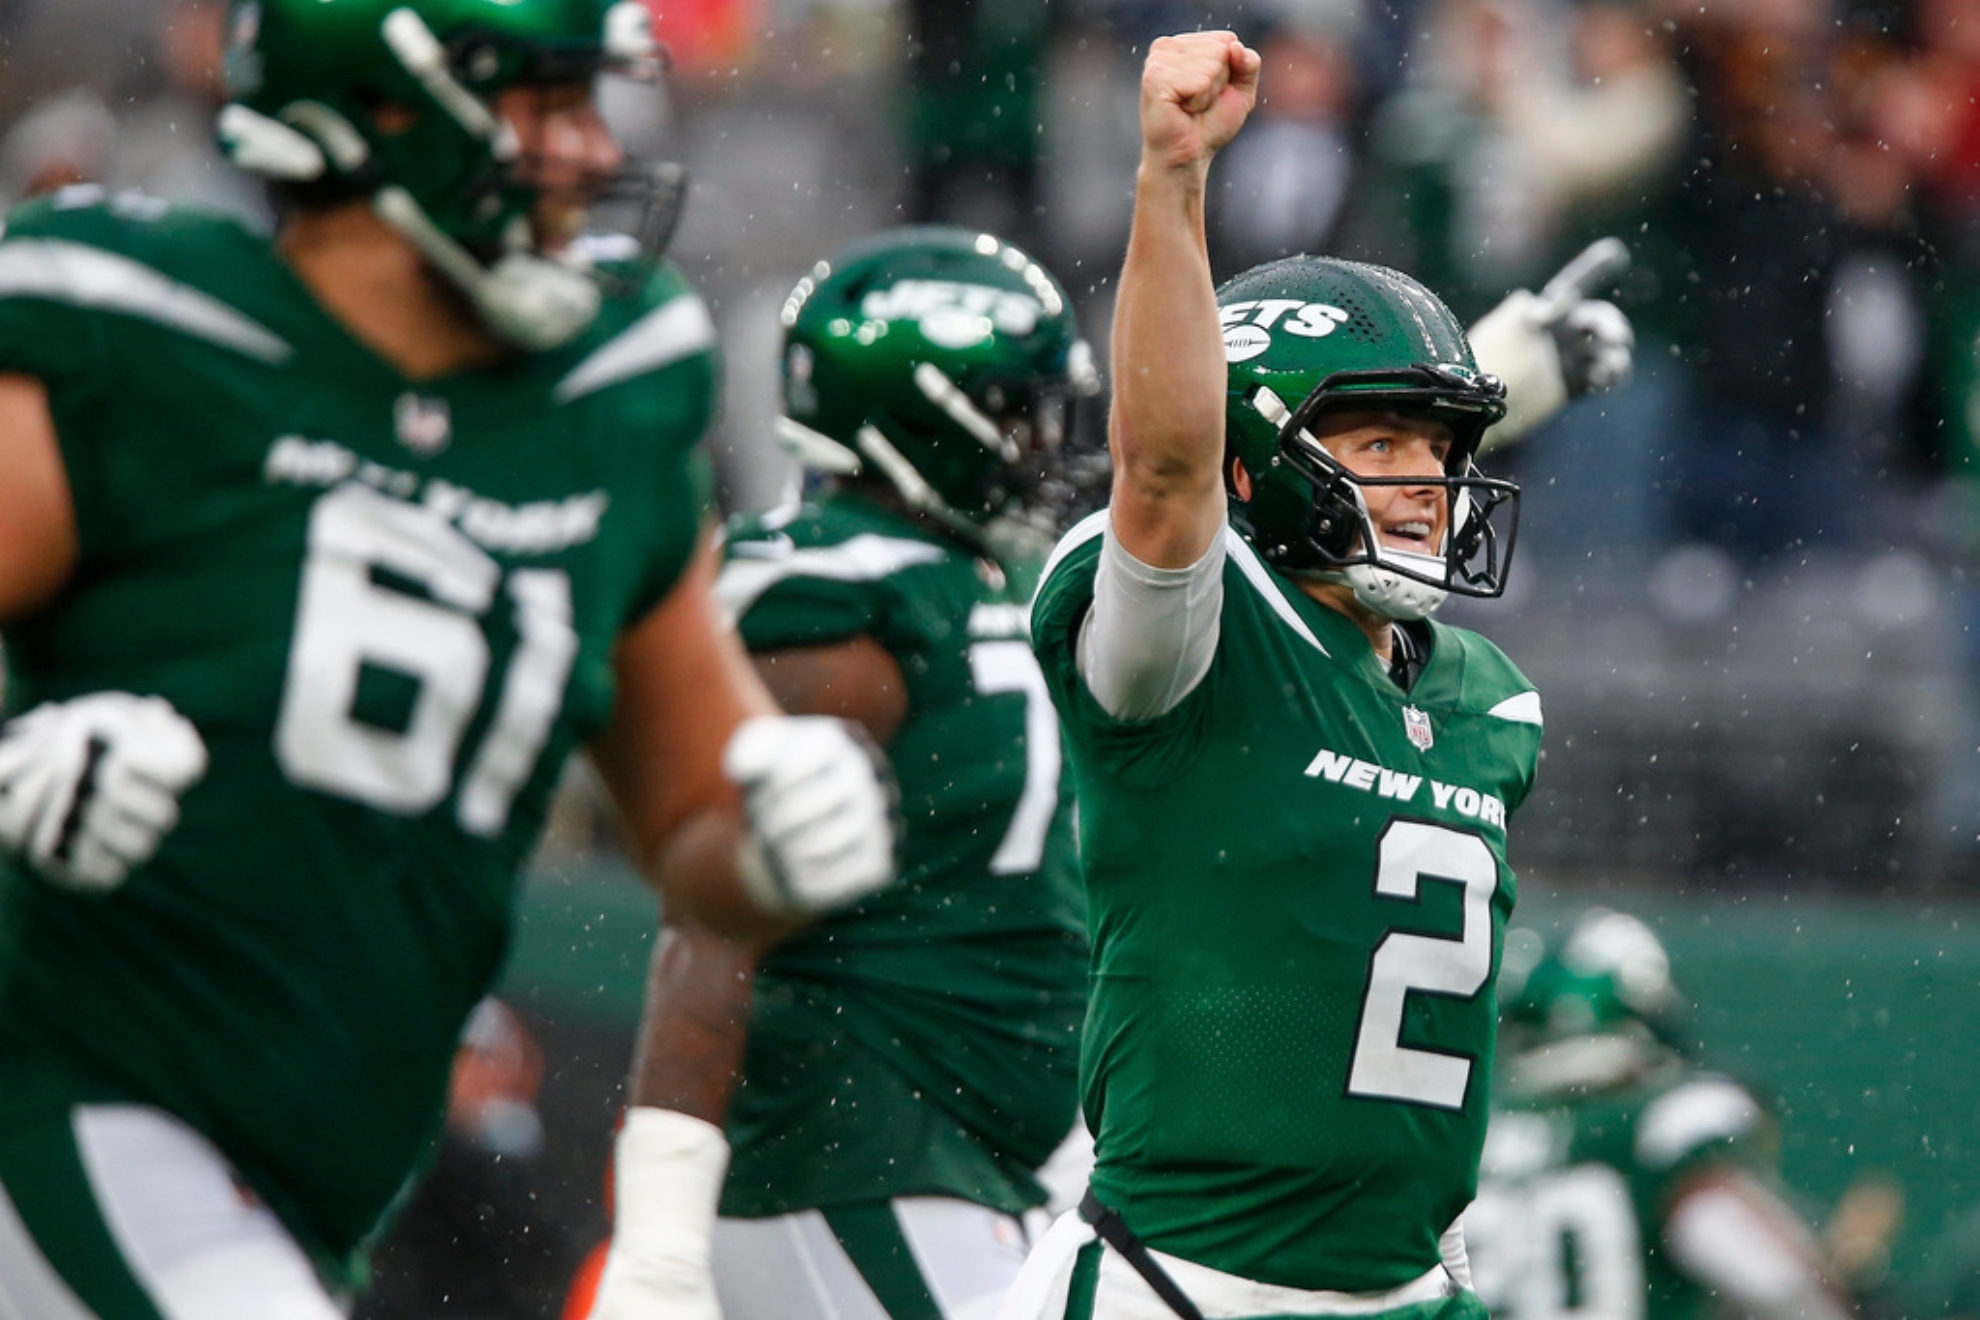 New York Jets quarterback Zach Wilson (2) celebrates after a touchdown against the Houston Texans during the second half of an NFL football game